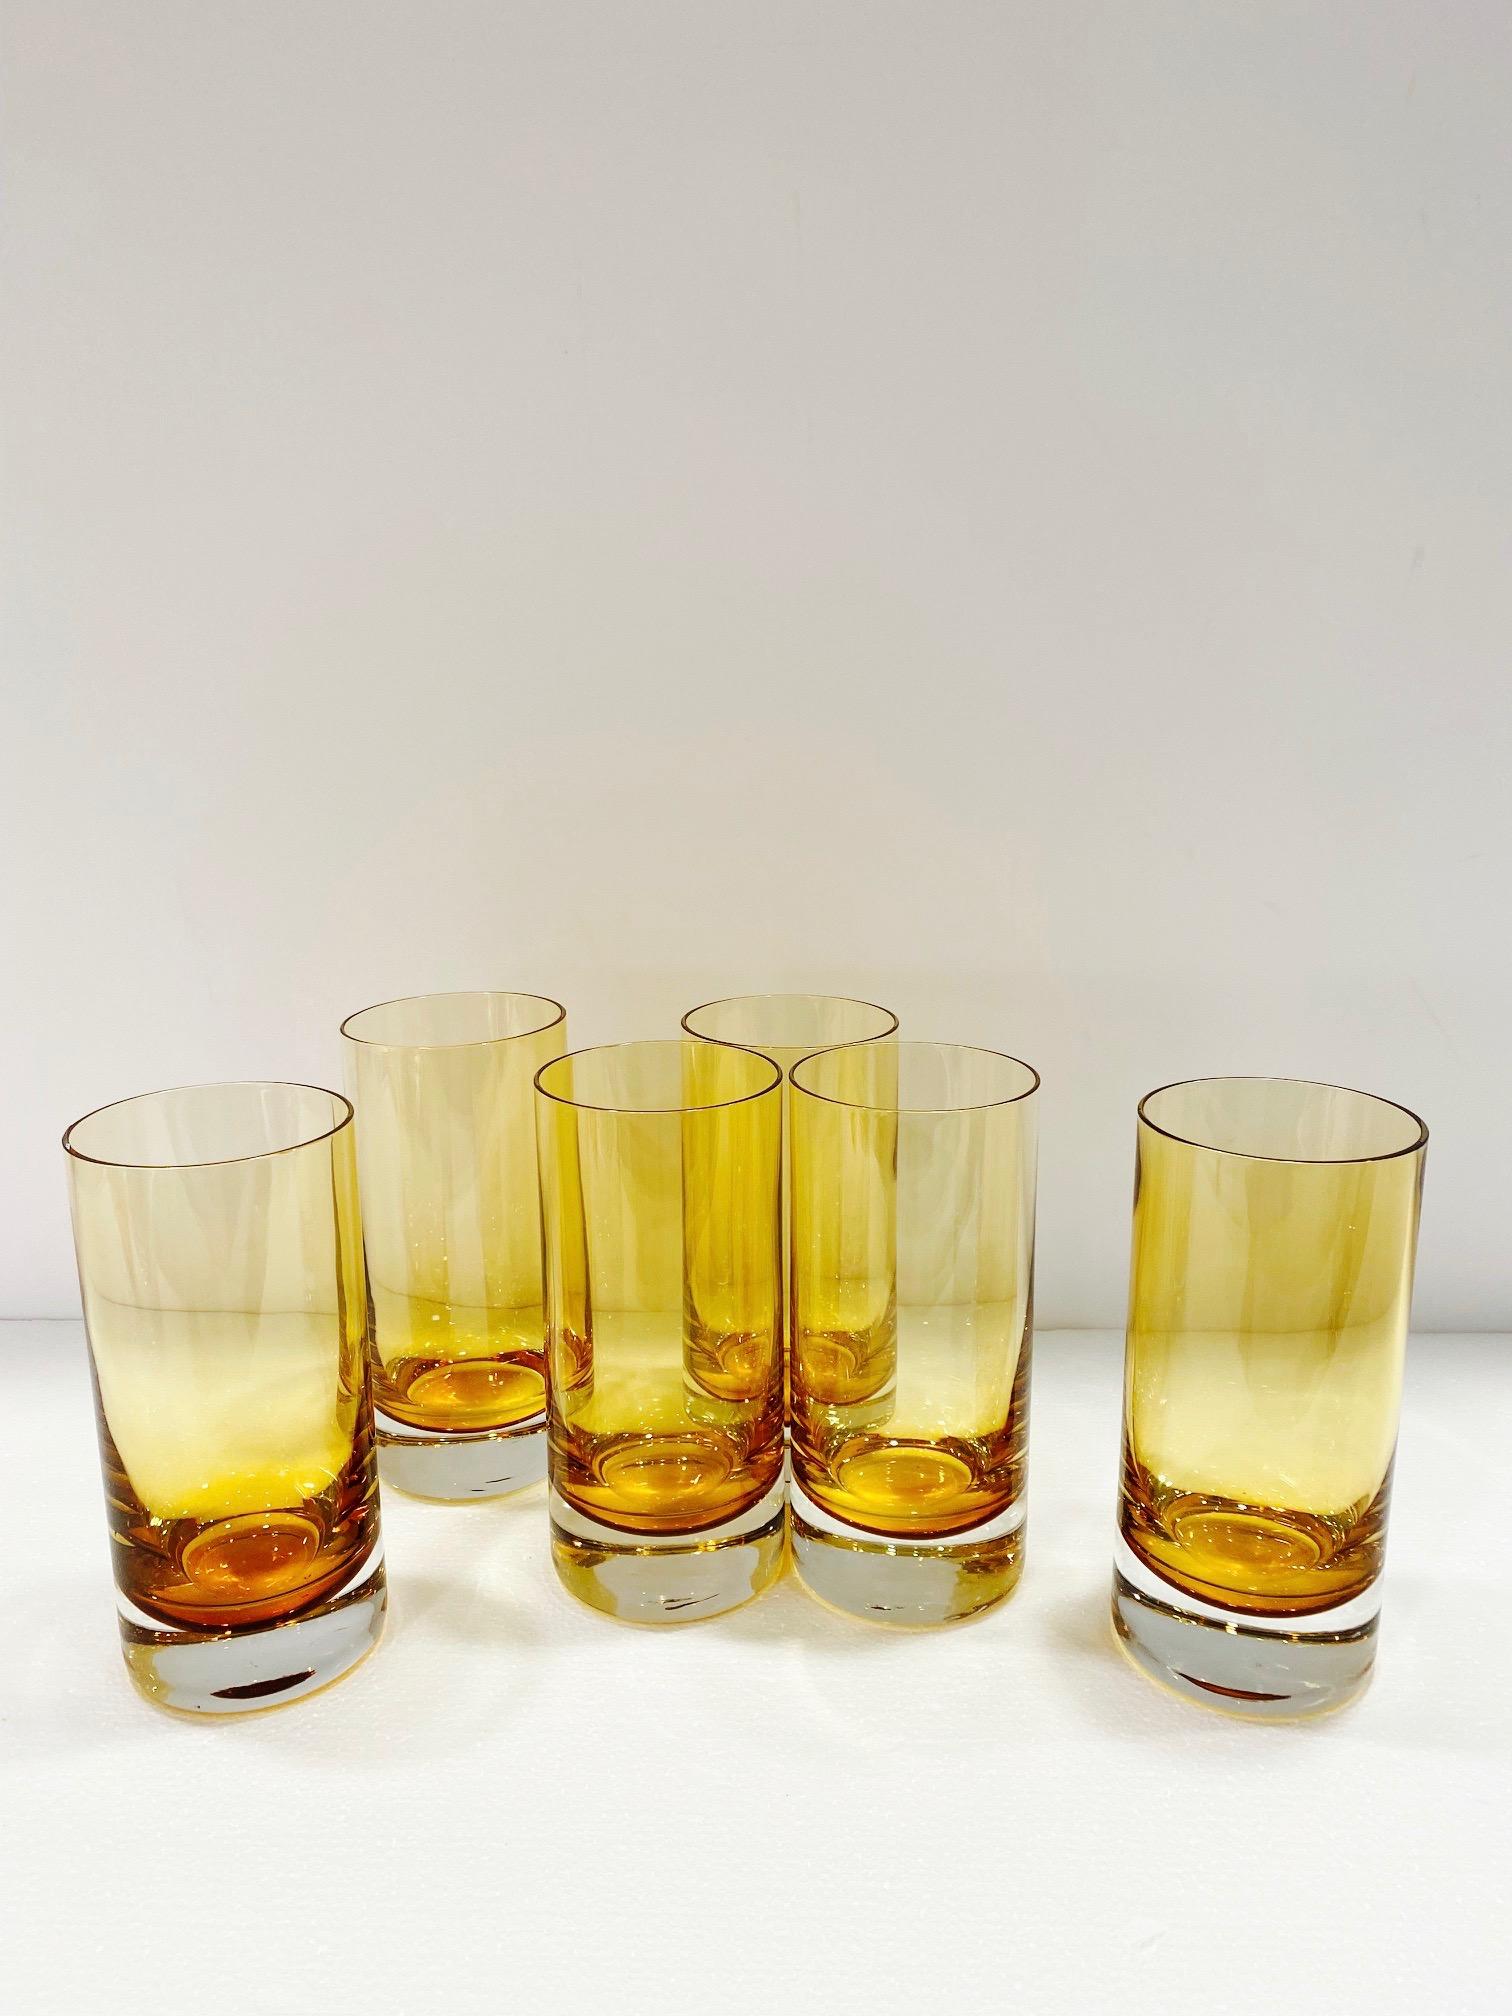 Set of six Mid-Century Modern hand blown Murano barware or dinnerware glasses. Sommerso cased glass design in yellow amber over clear glass. Exquisite design in heavy weight glass. Makes a chic addition to any barware or tableware set.